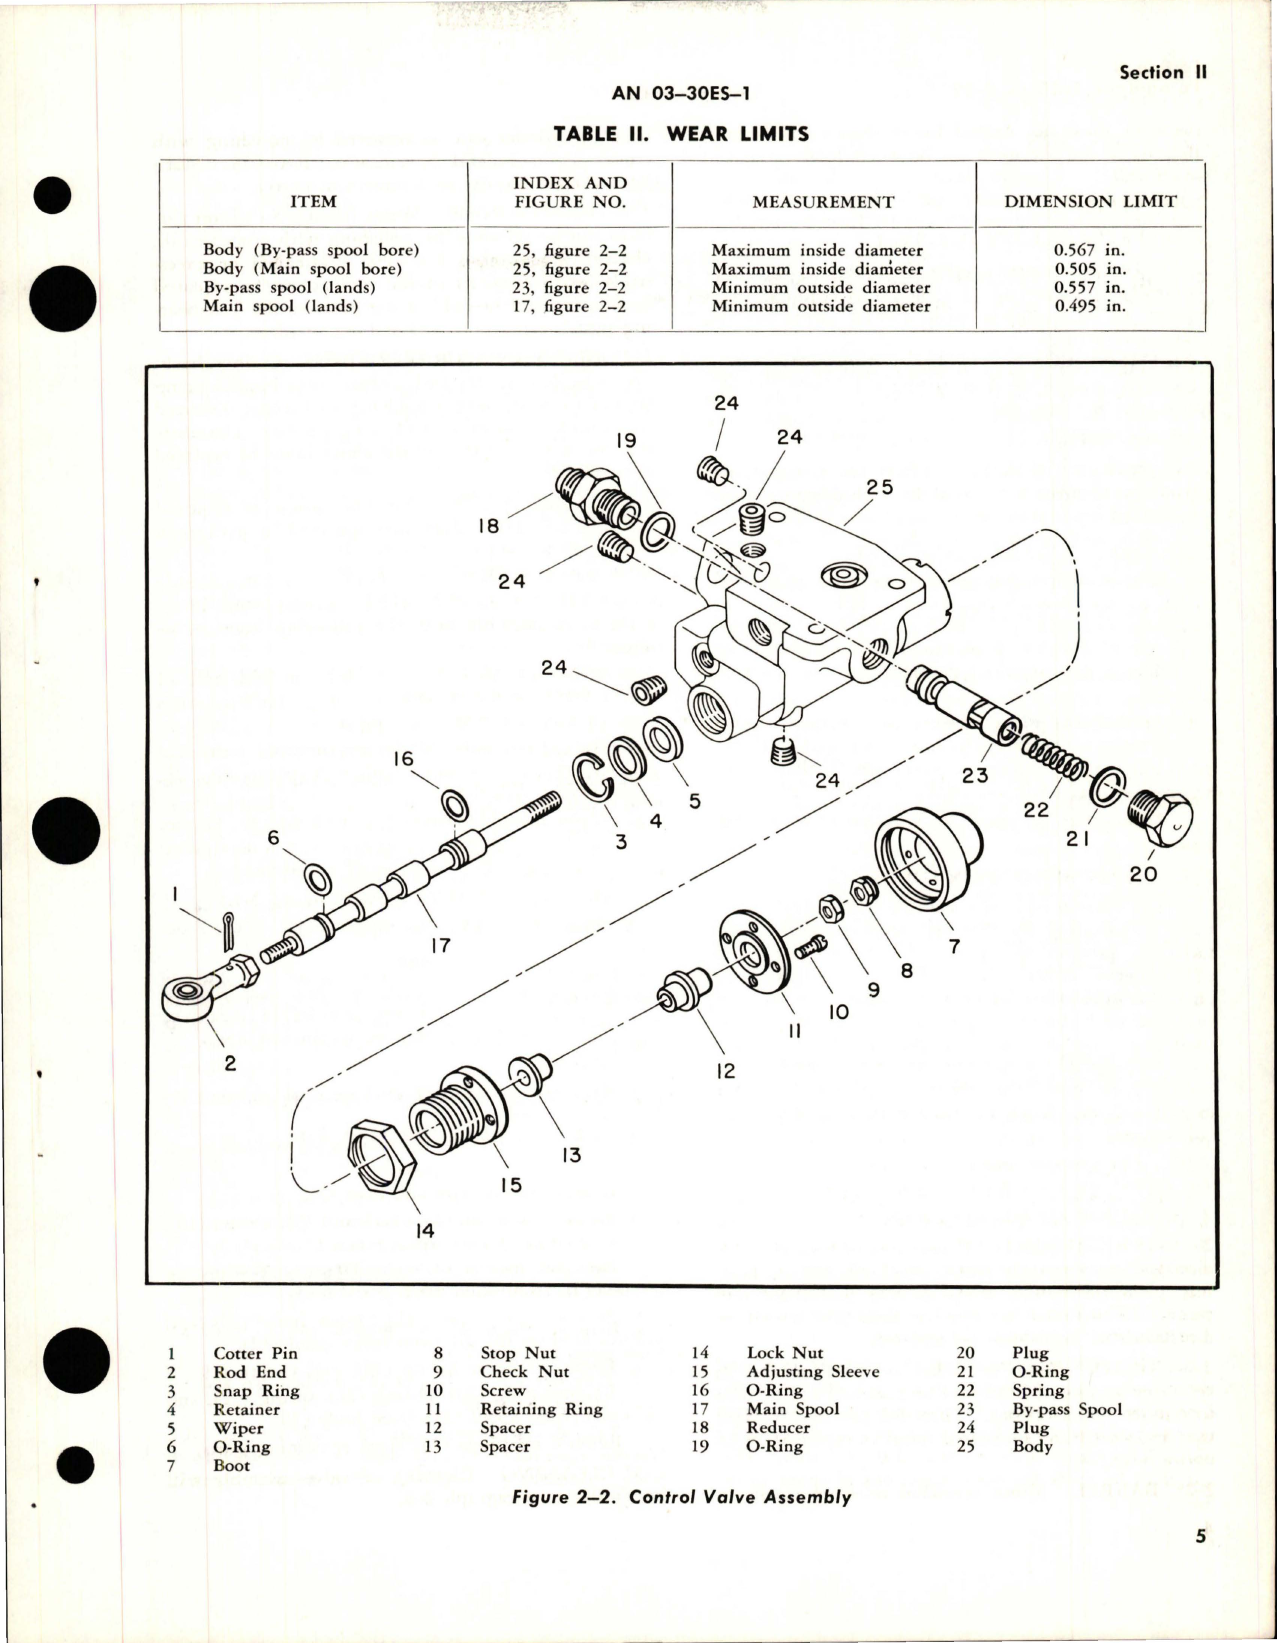 Sample page 7 from AirCorps Library document: Overhaul Instructions for Surface Control Boost Assembly - Parts 40-8047011-89 and 40-8047011-99 